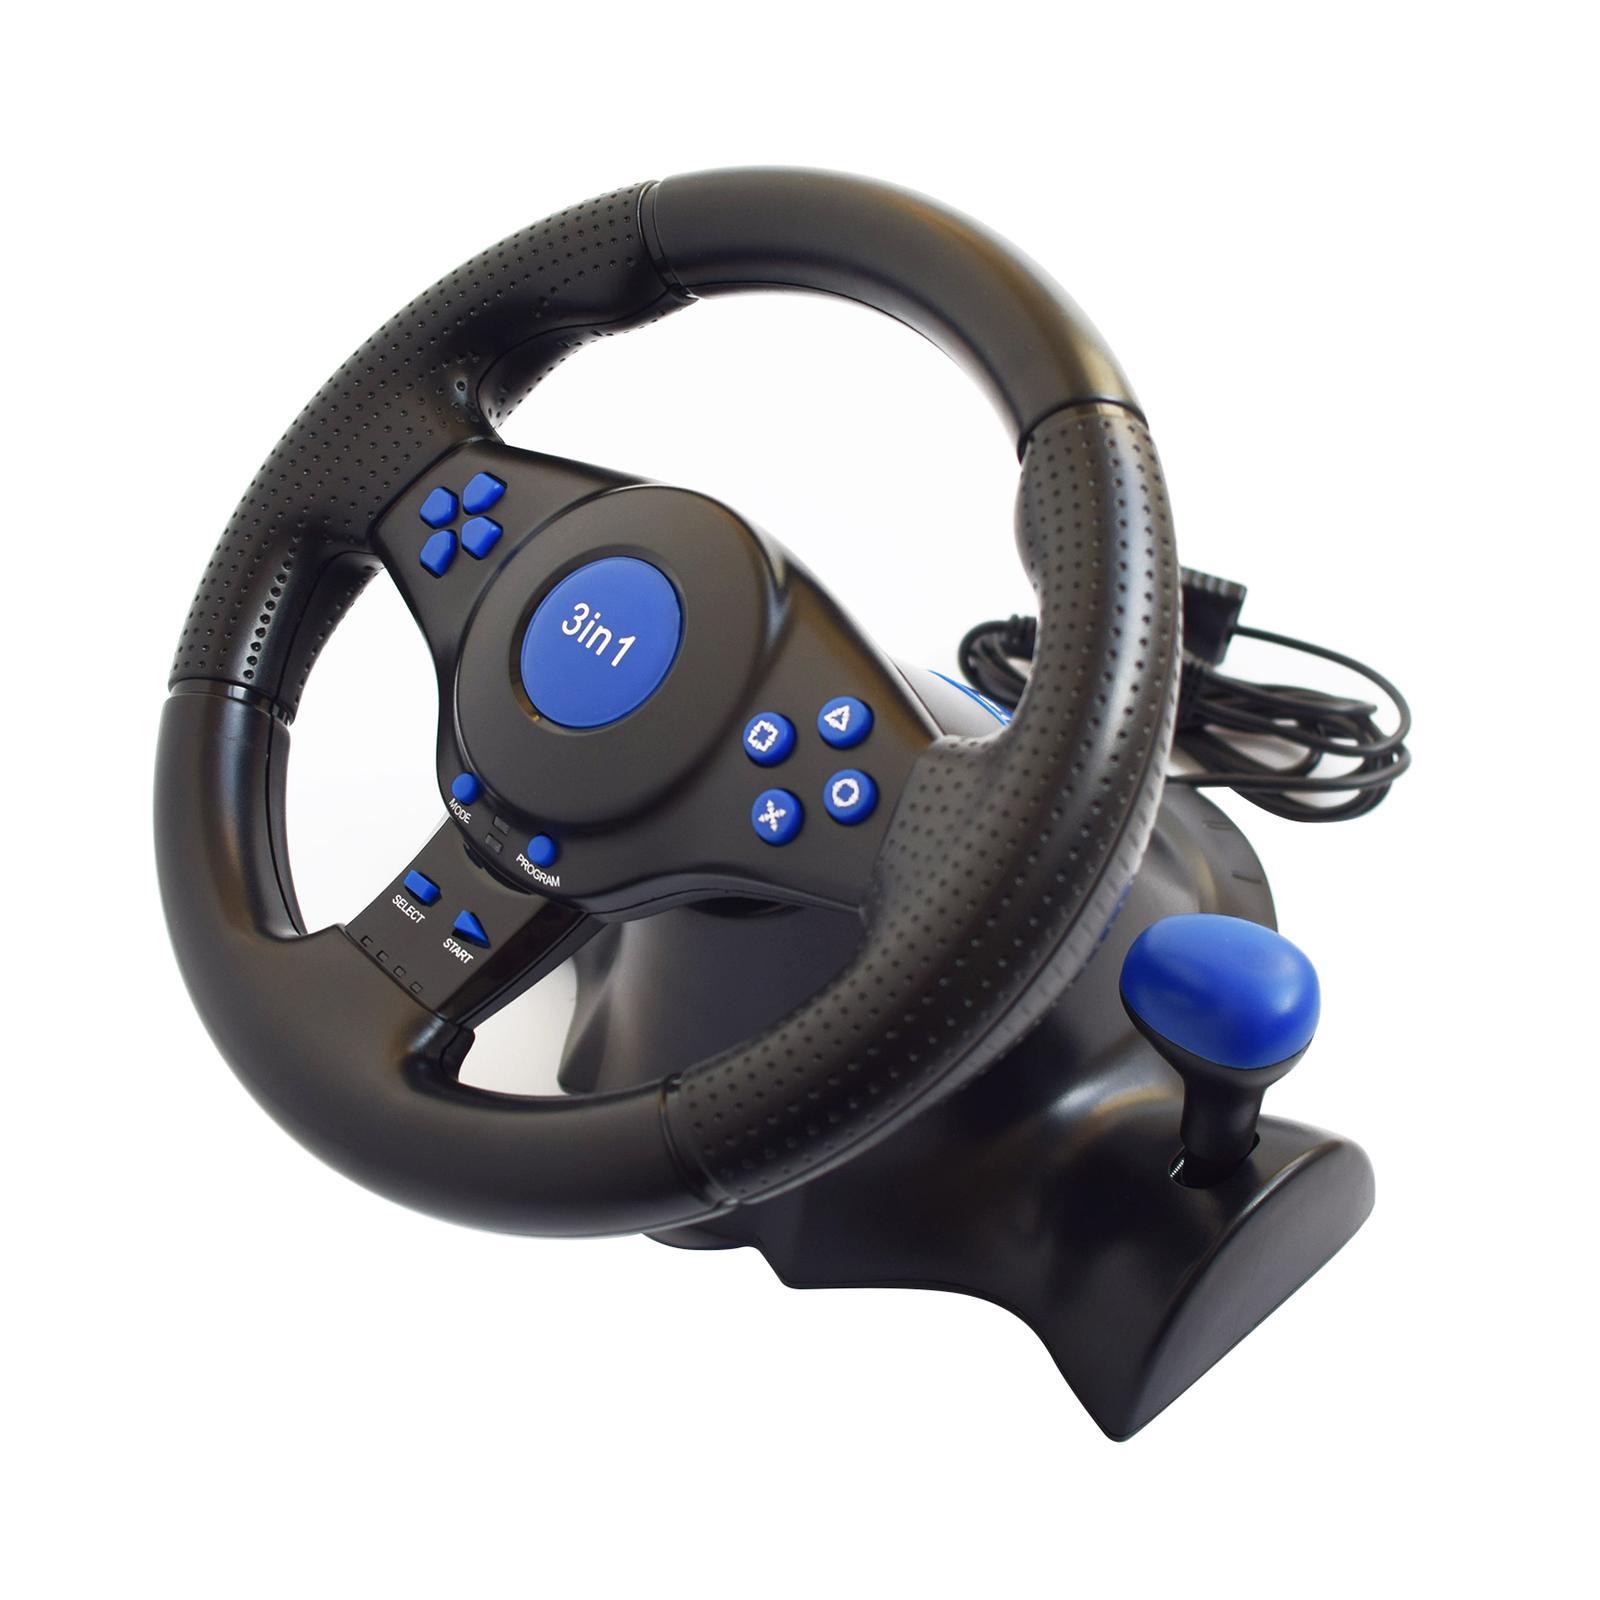 Driving Game Racing Steering Wheel & Brake Pedals Kit for   PC Game